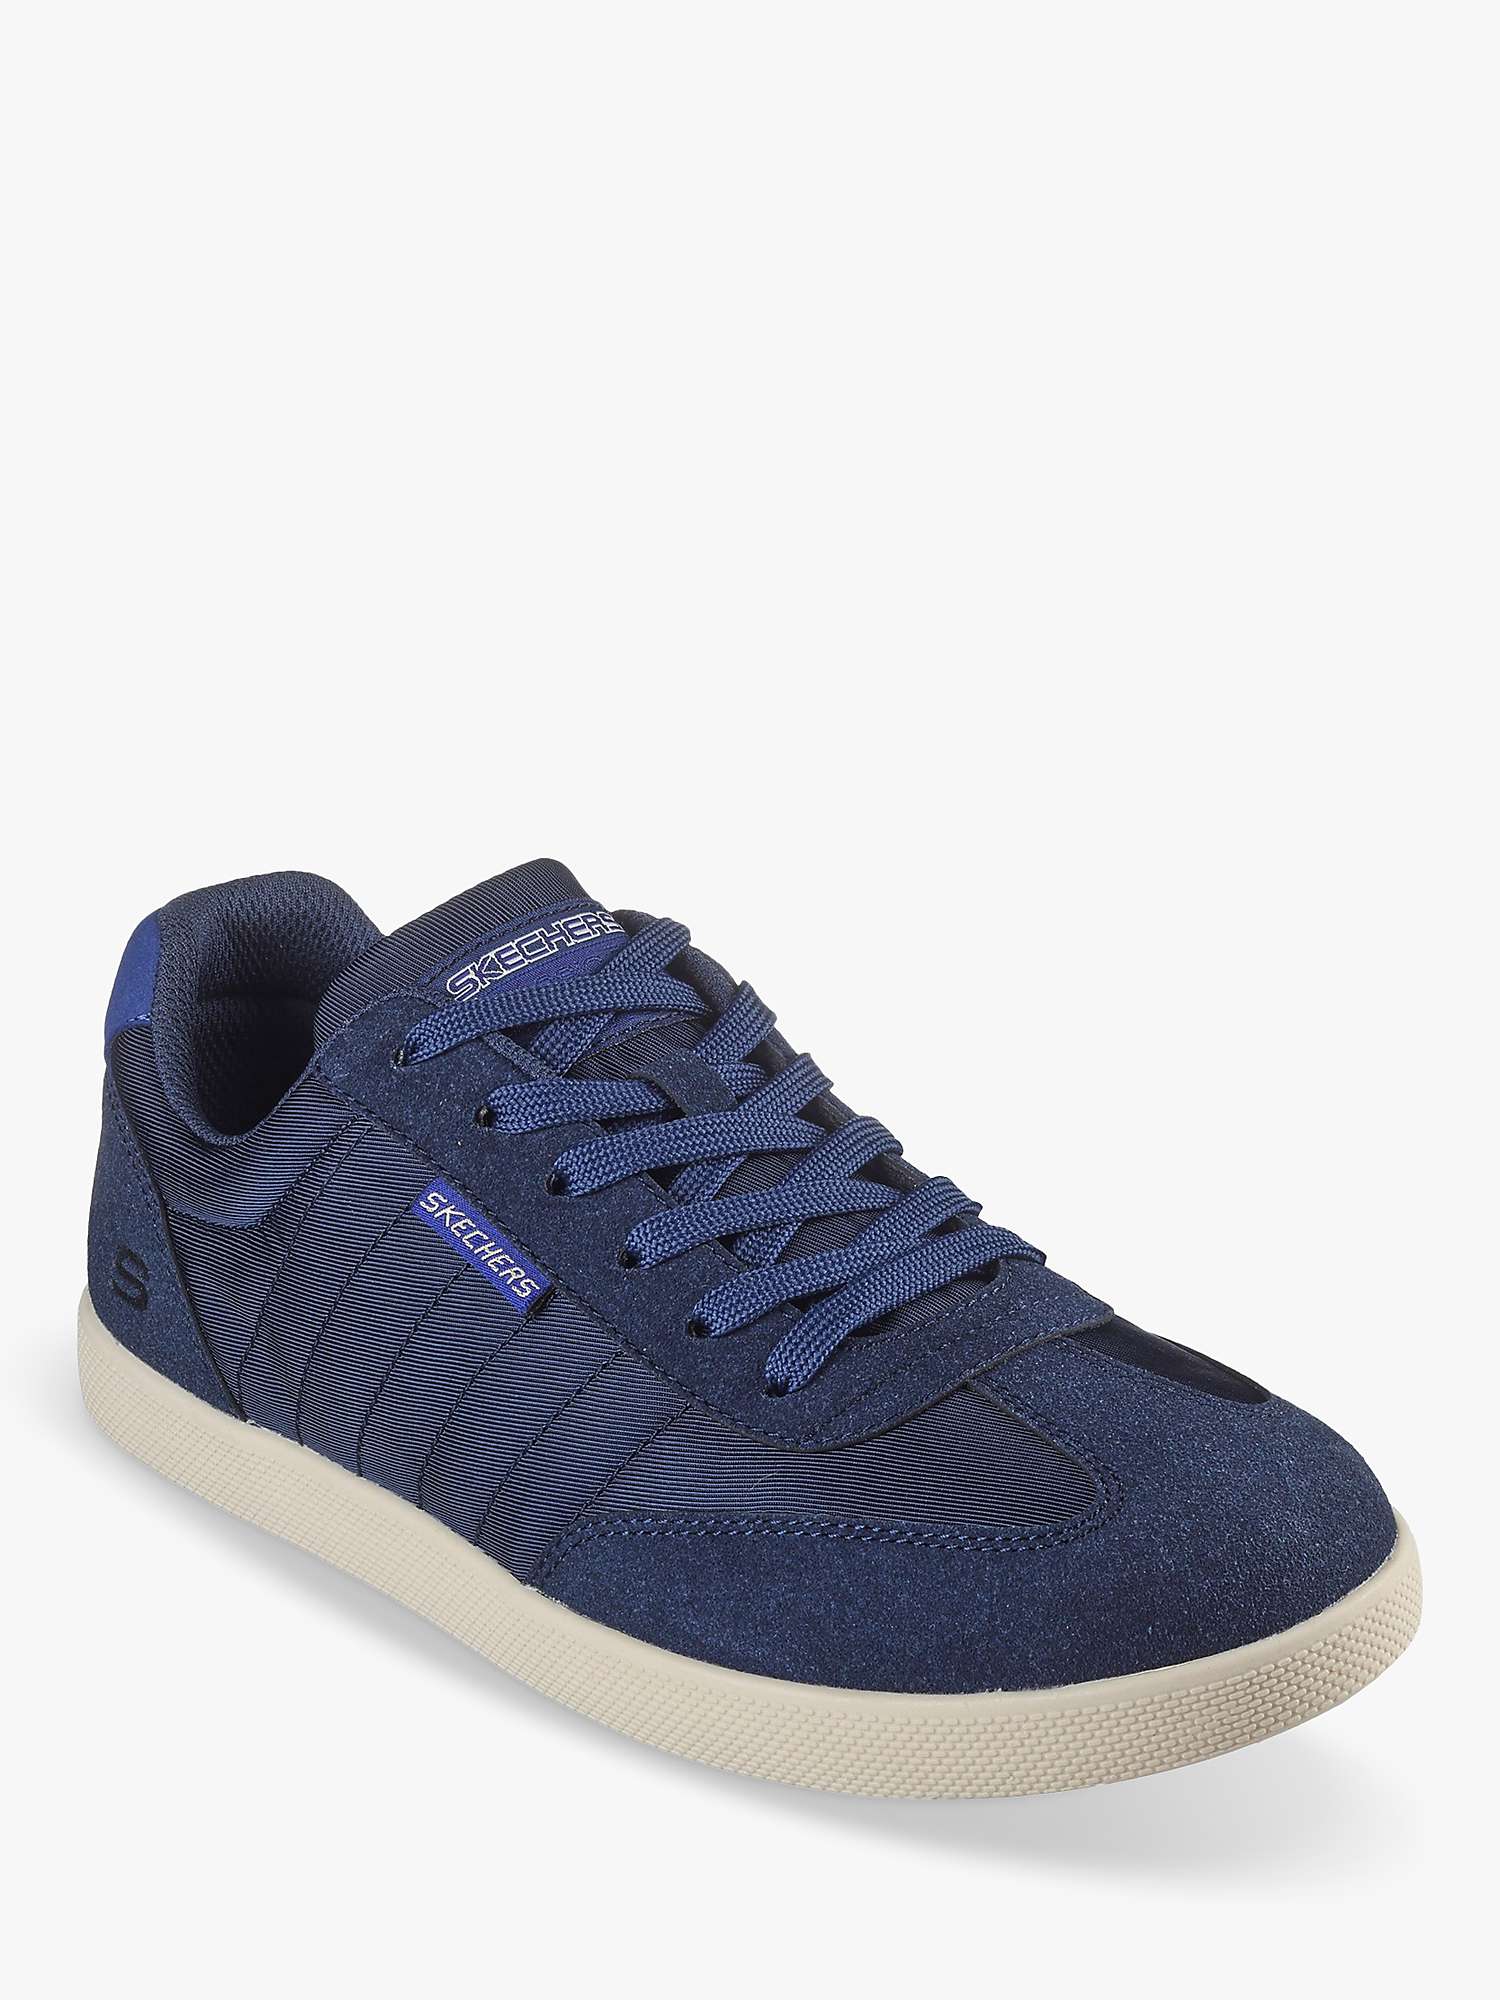 Buy Skechers Placer Vinson Lace-Up Trainers, Navy Online at johnlewis.com